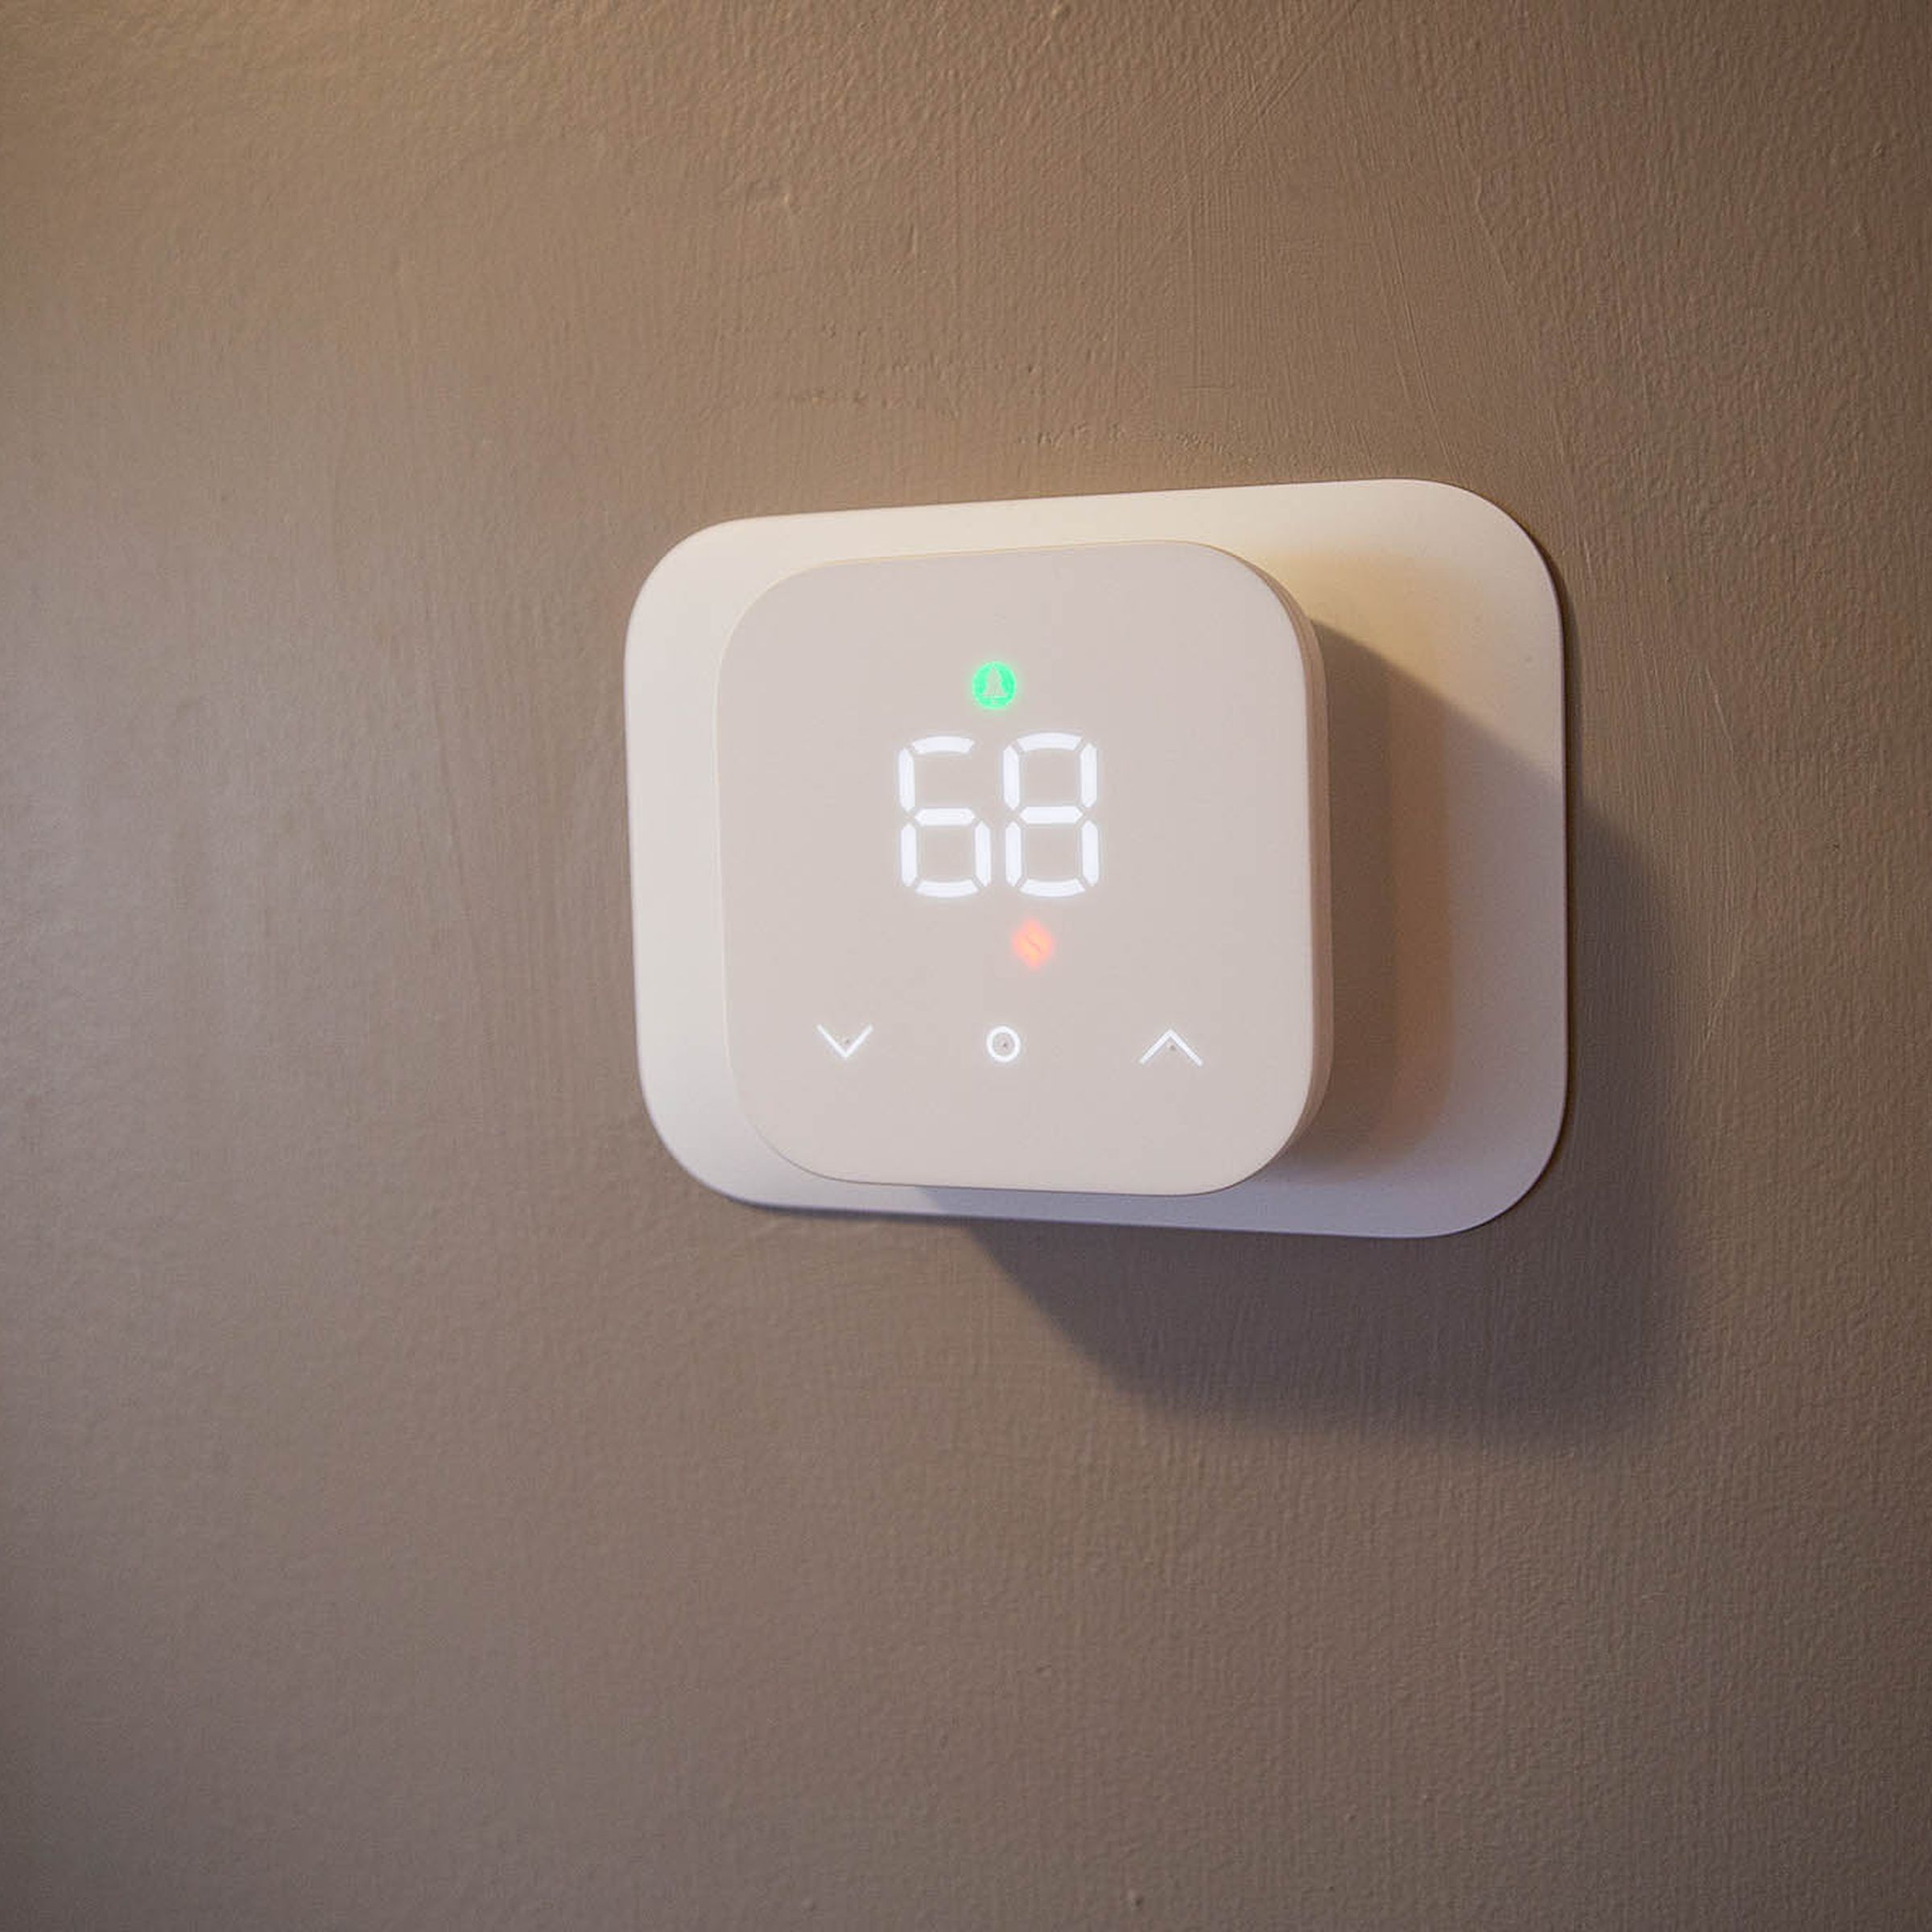 The Amazon Smart Thermostat mounted to a wall.